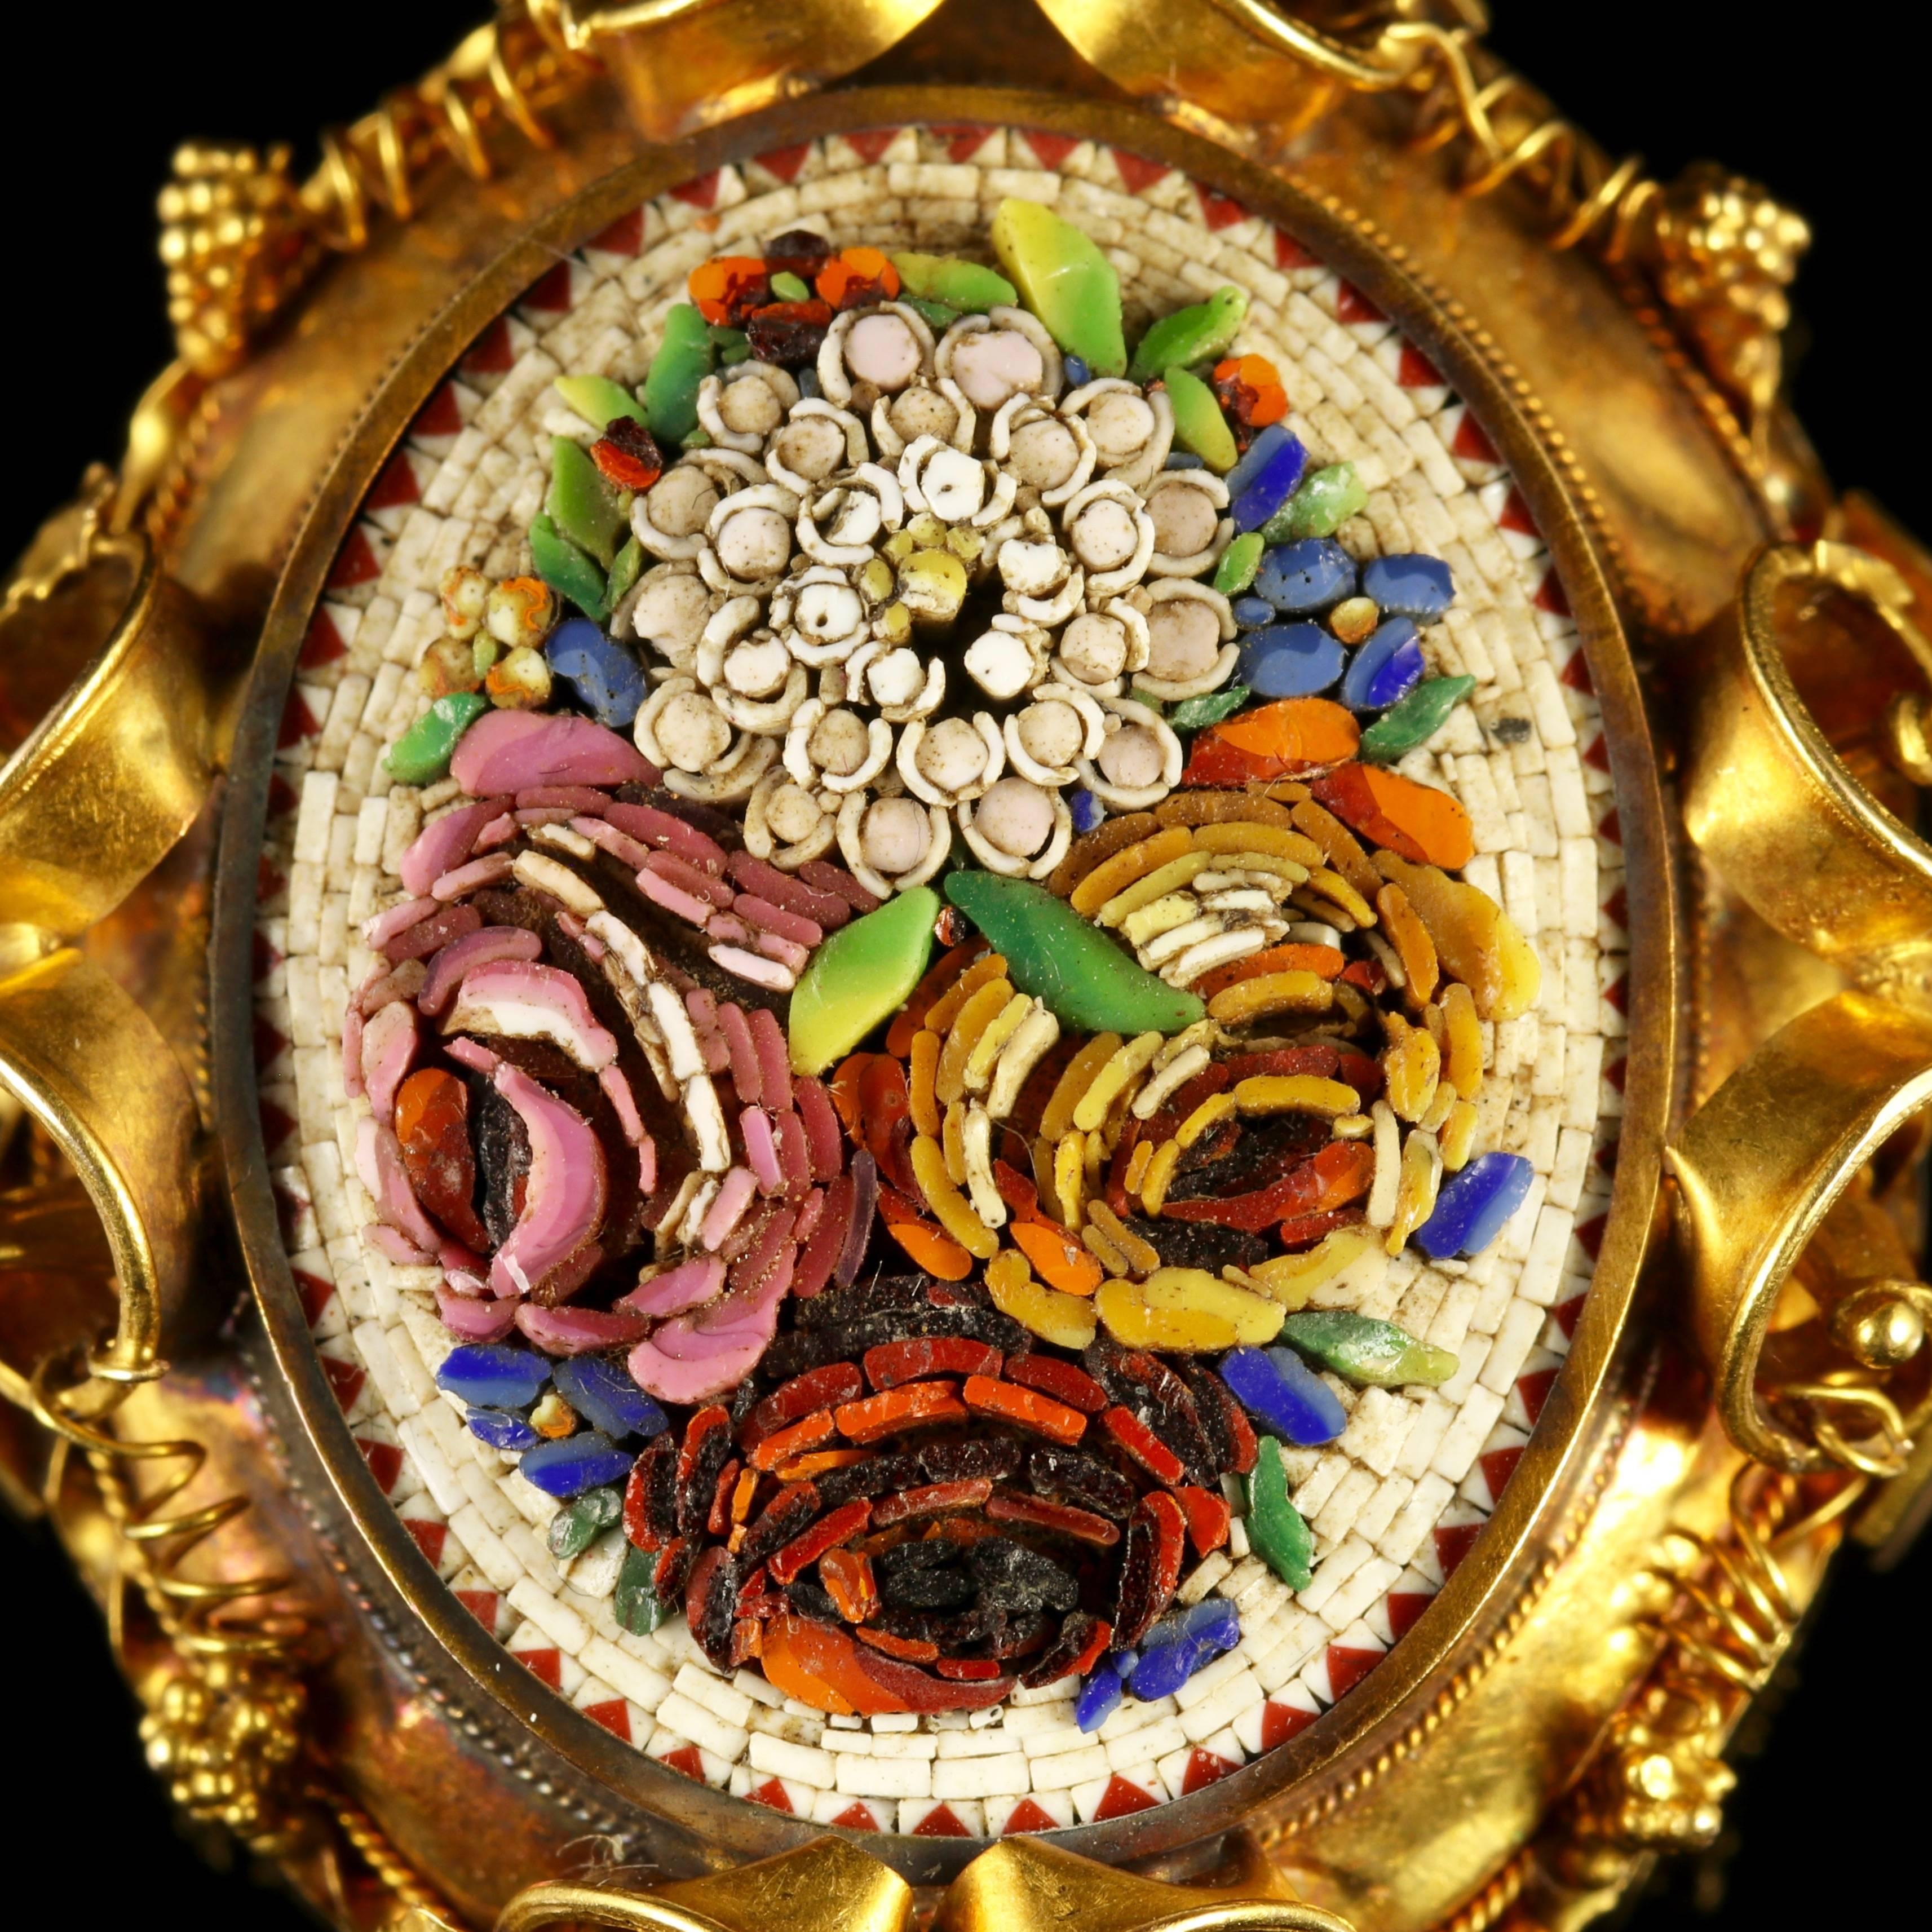 This genuine Victorian 18ct Yellow Gold Micro-mosaic locket pendant is stunning.

A beautiful piece of victorian history, Circa 1860.

The Micro-mosaic depicts a bouquet of flowers in a variety of vibrant colours with beautiful twisting ribbon